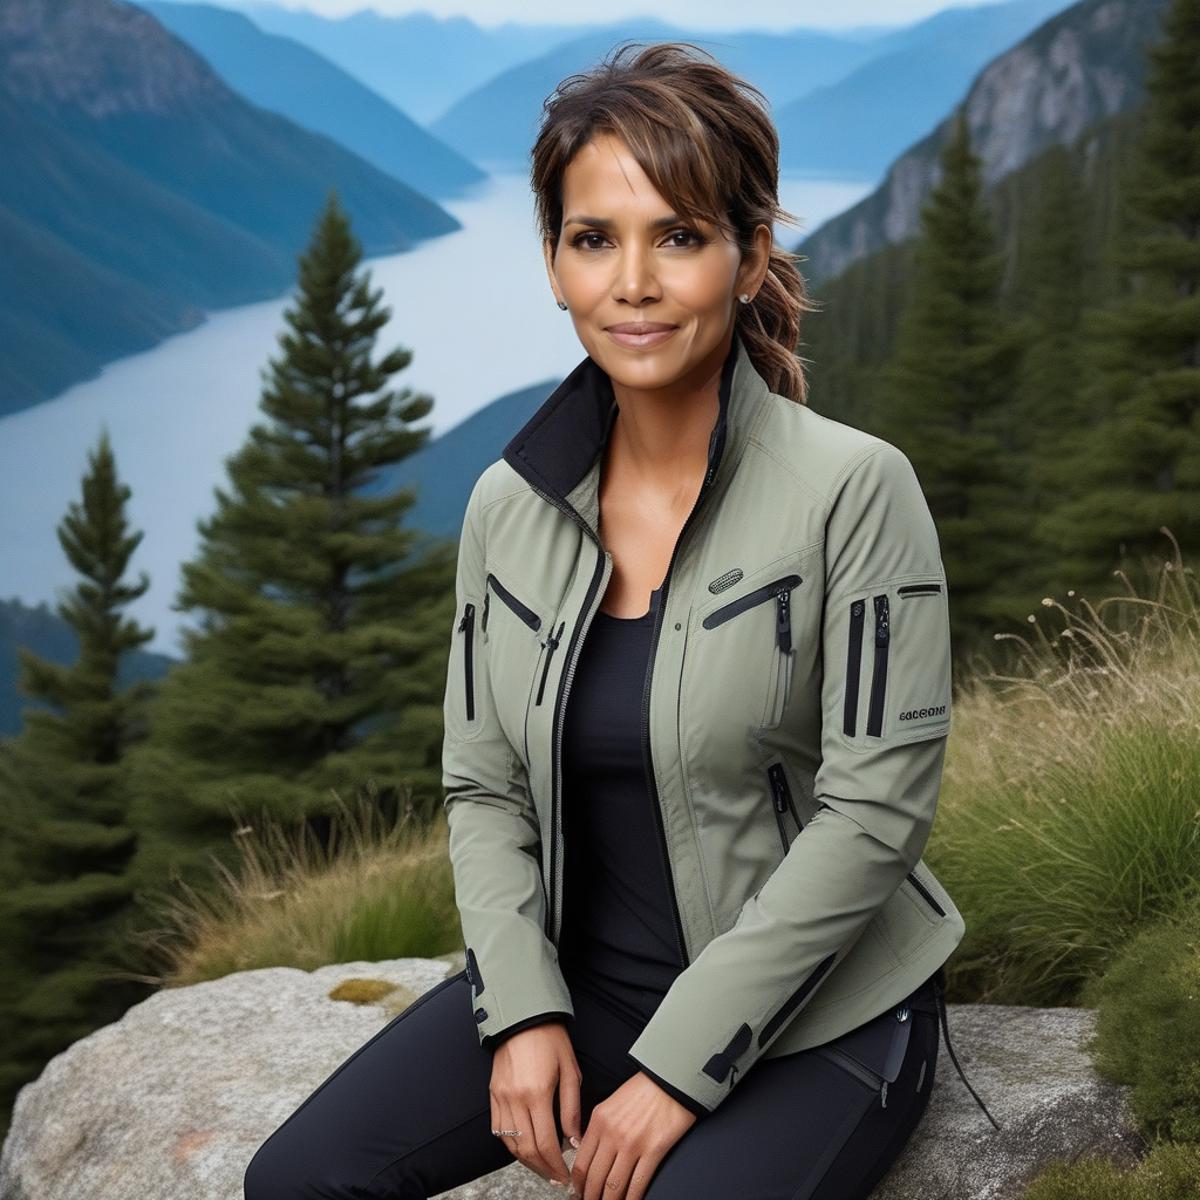 A woman in a green jacket sitting on a rock in a mountainous area.